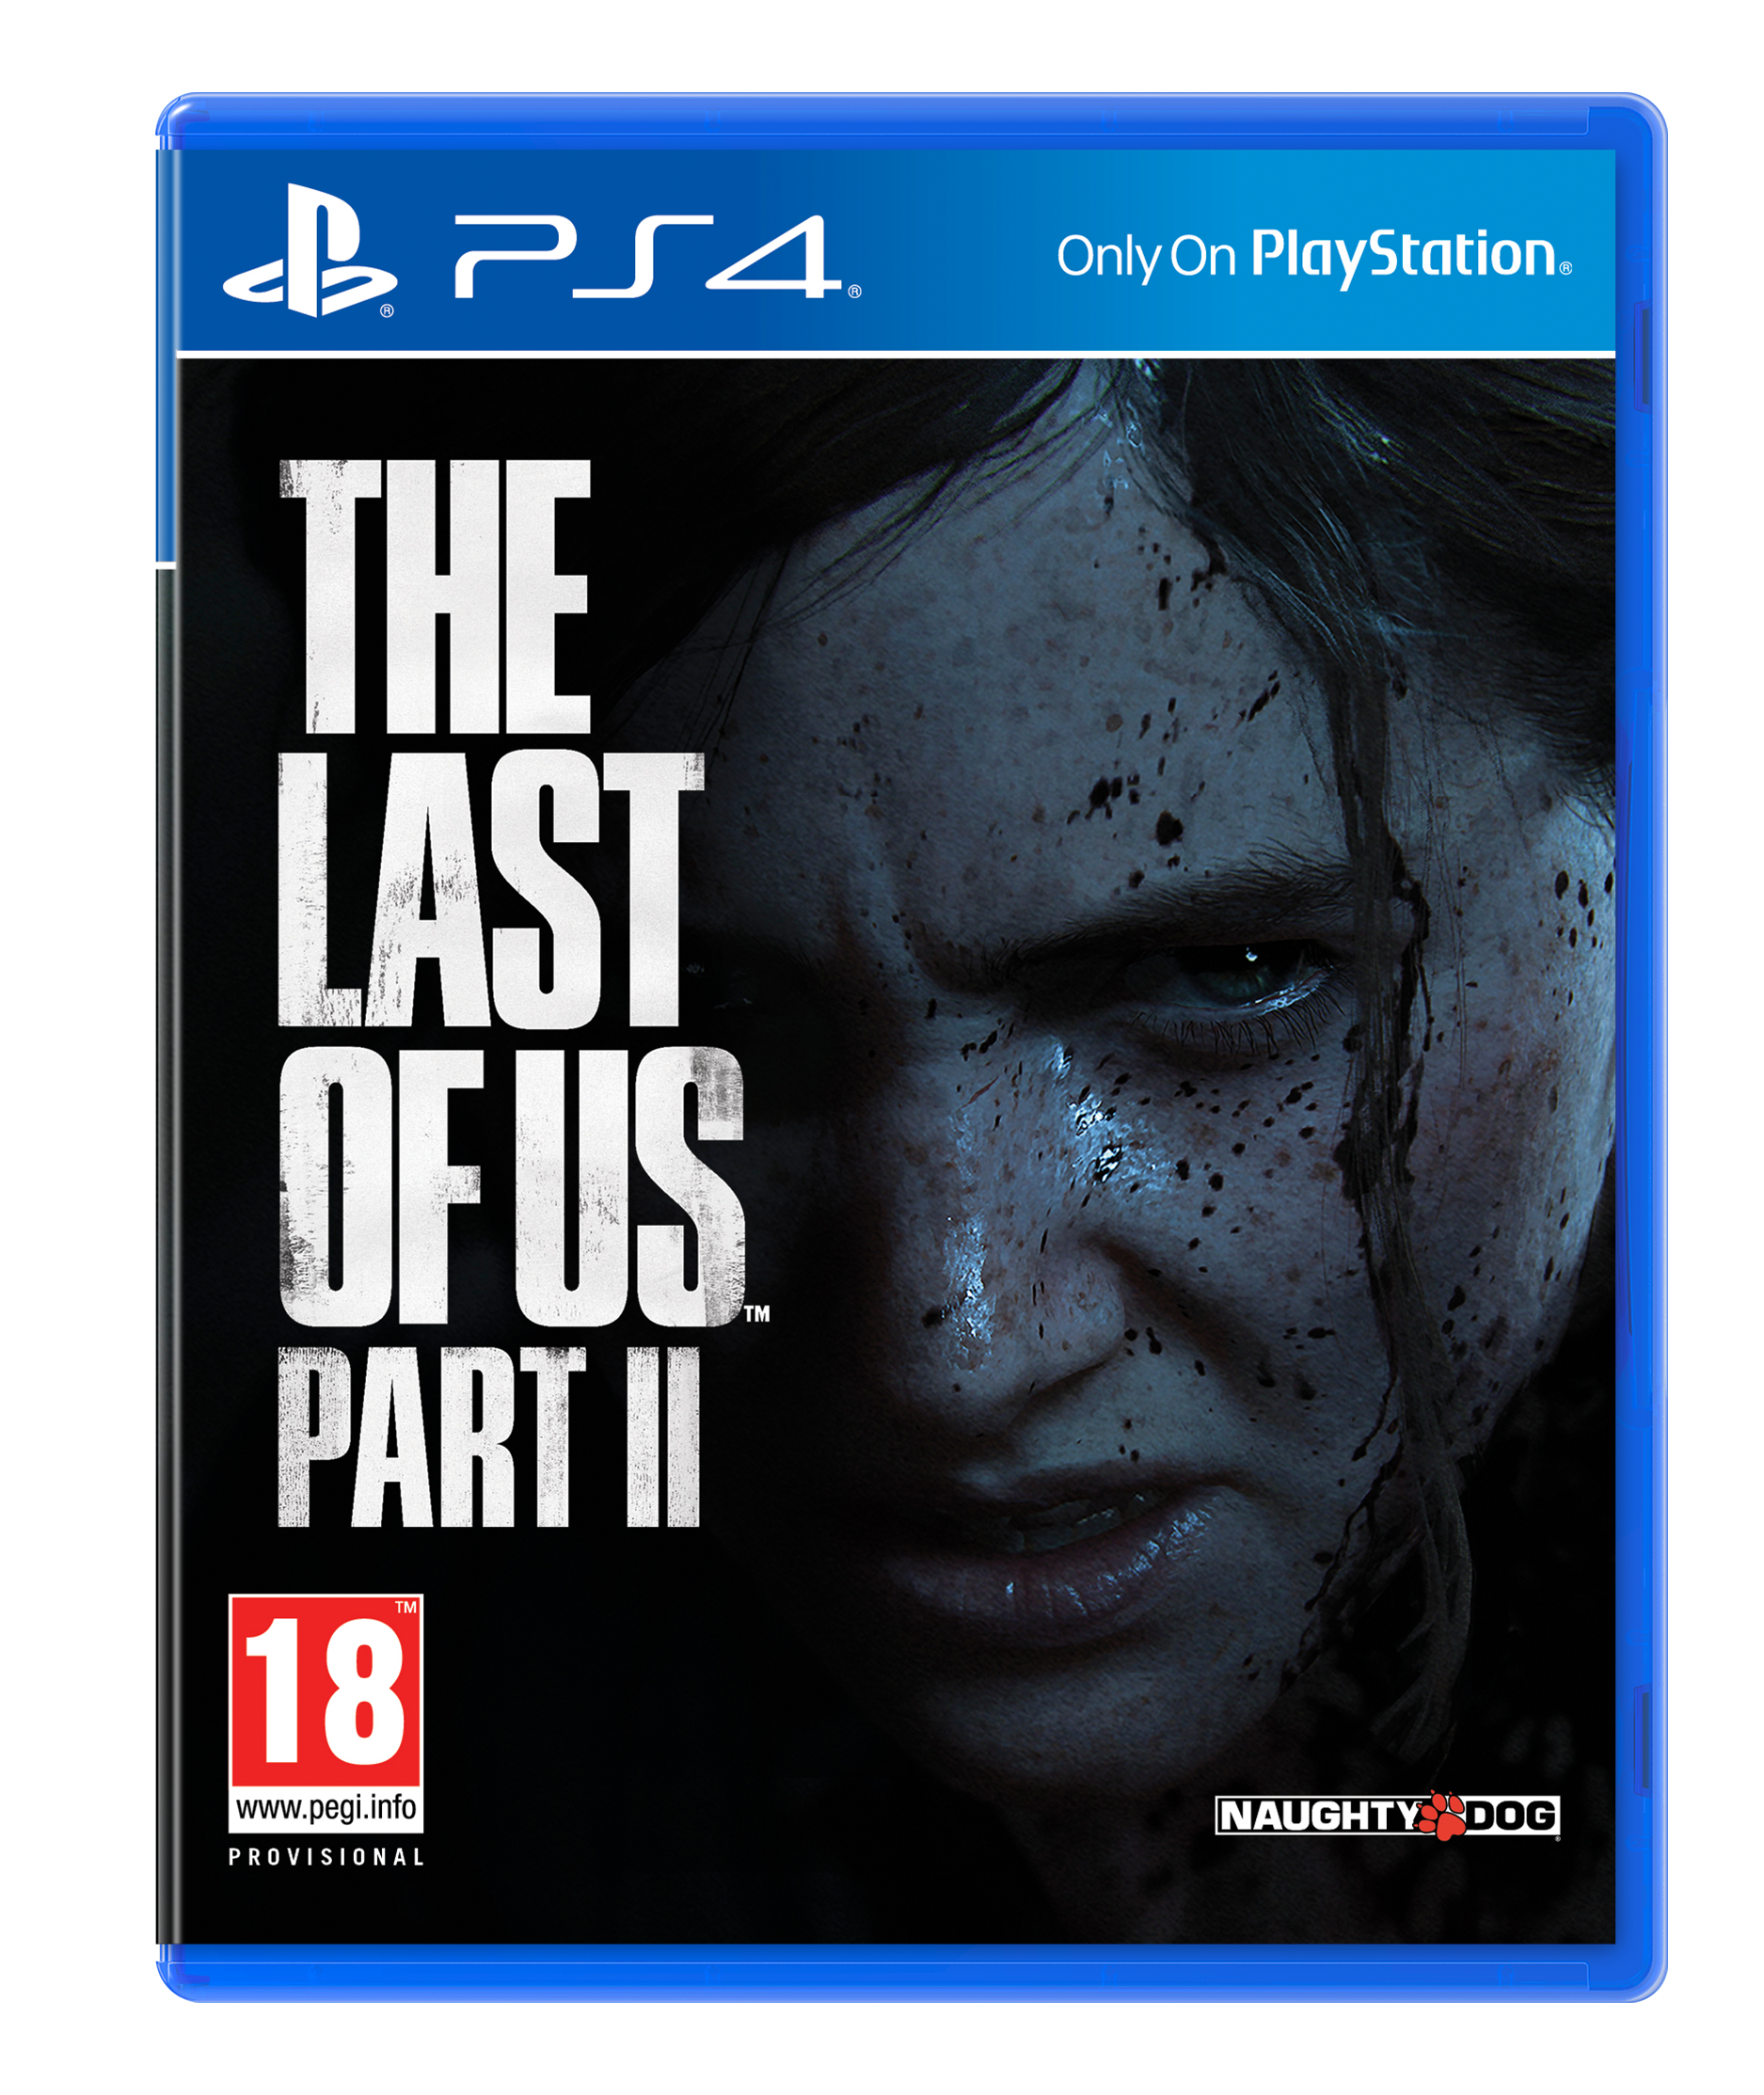 kaufe-the-last-of-us-part-ii-2-reversible-cover-art